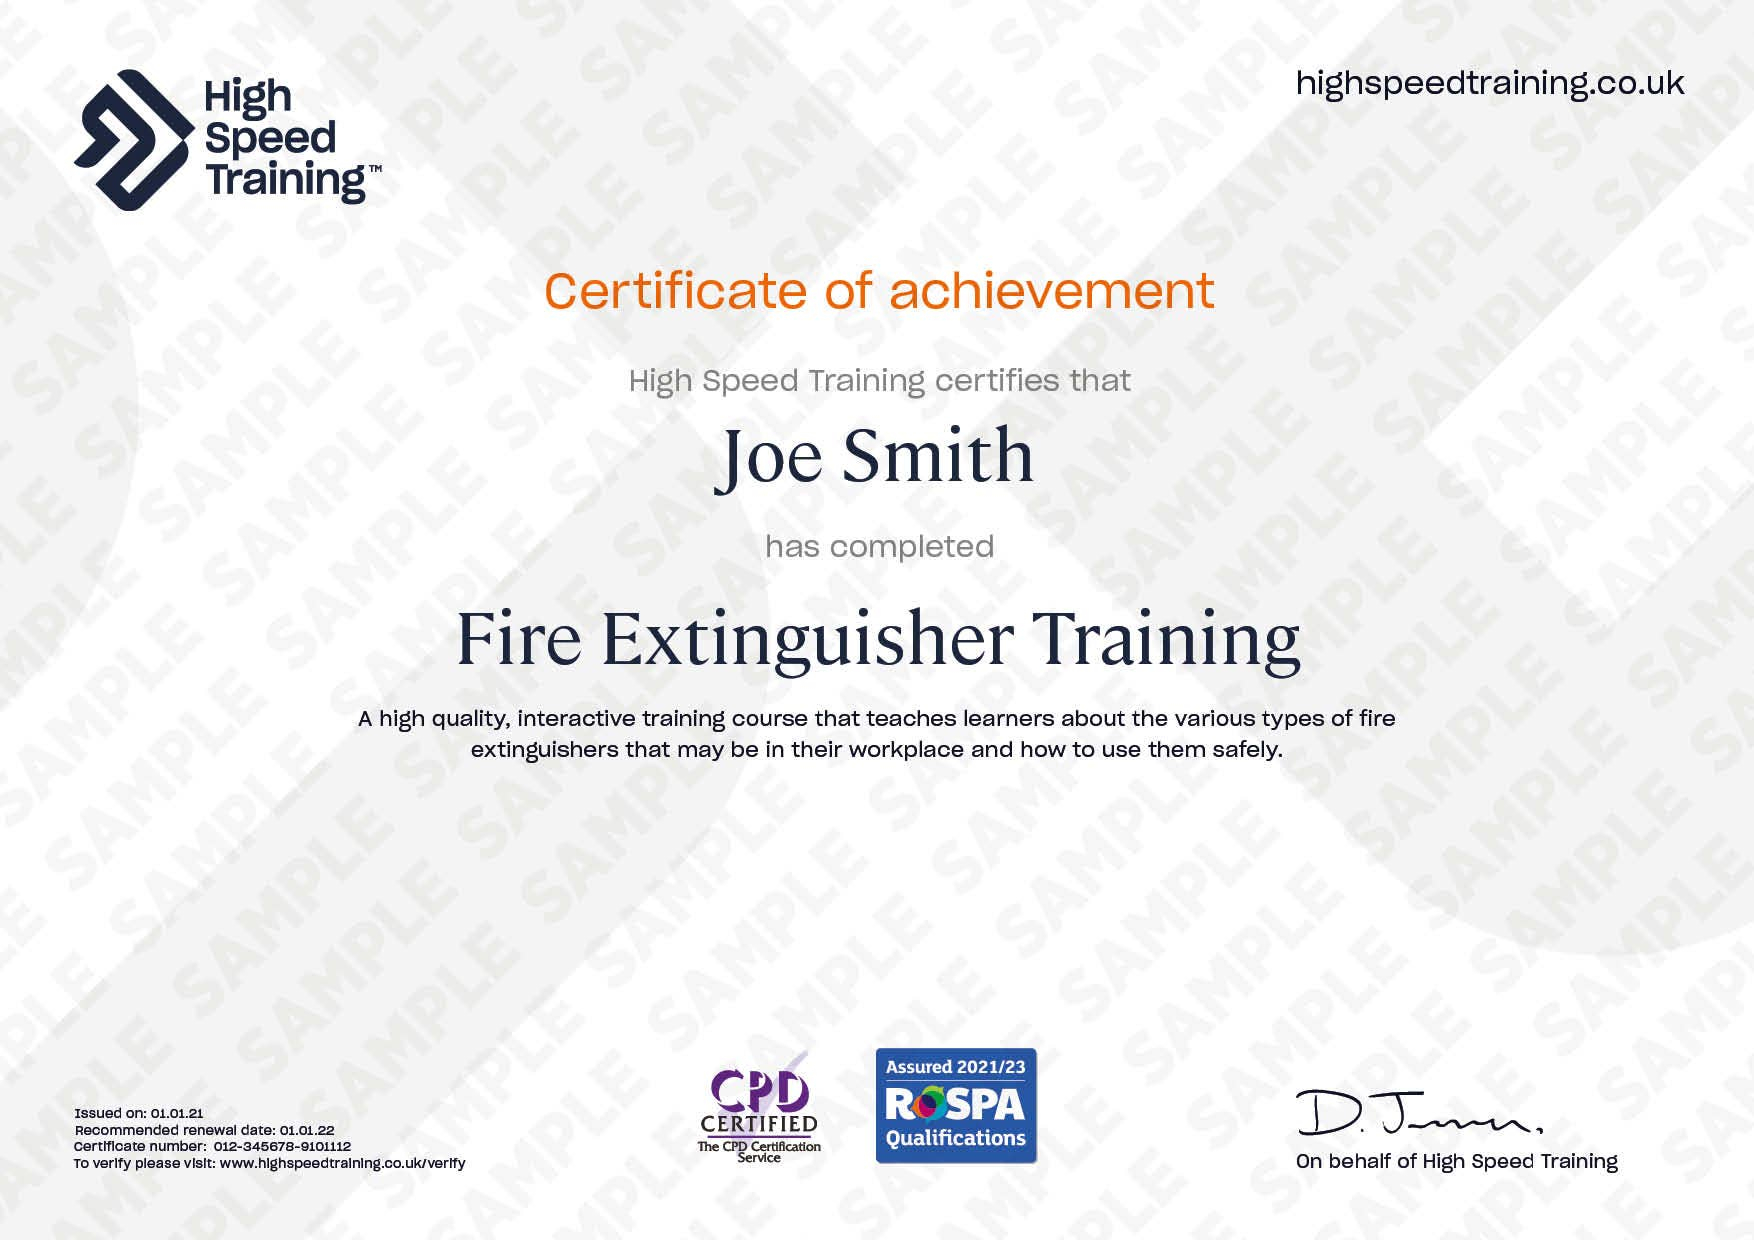 Fire Extinguisher Training Course  Online Course & Certification